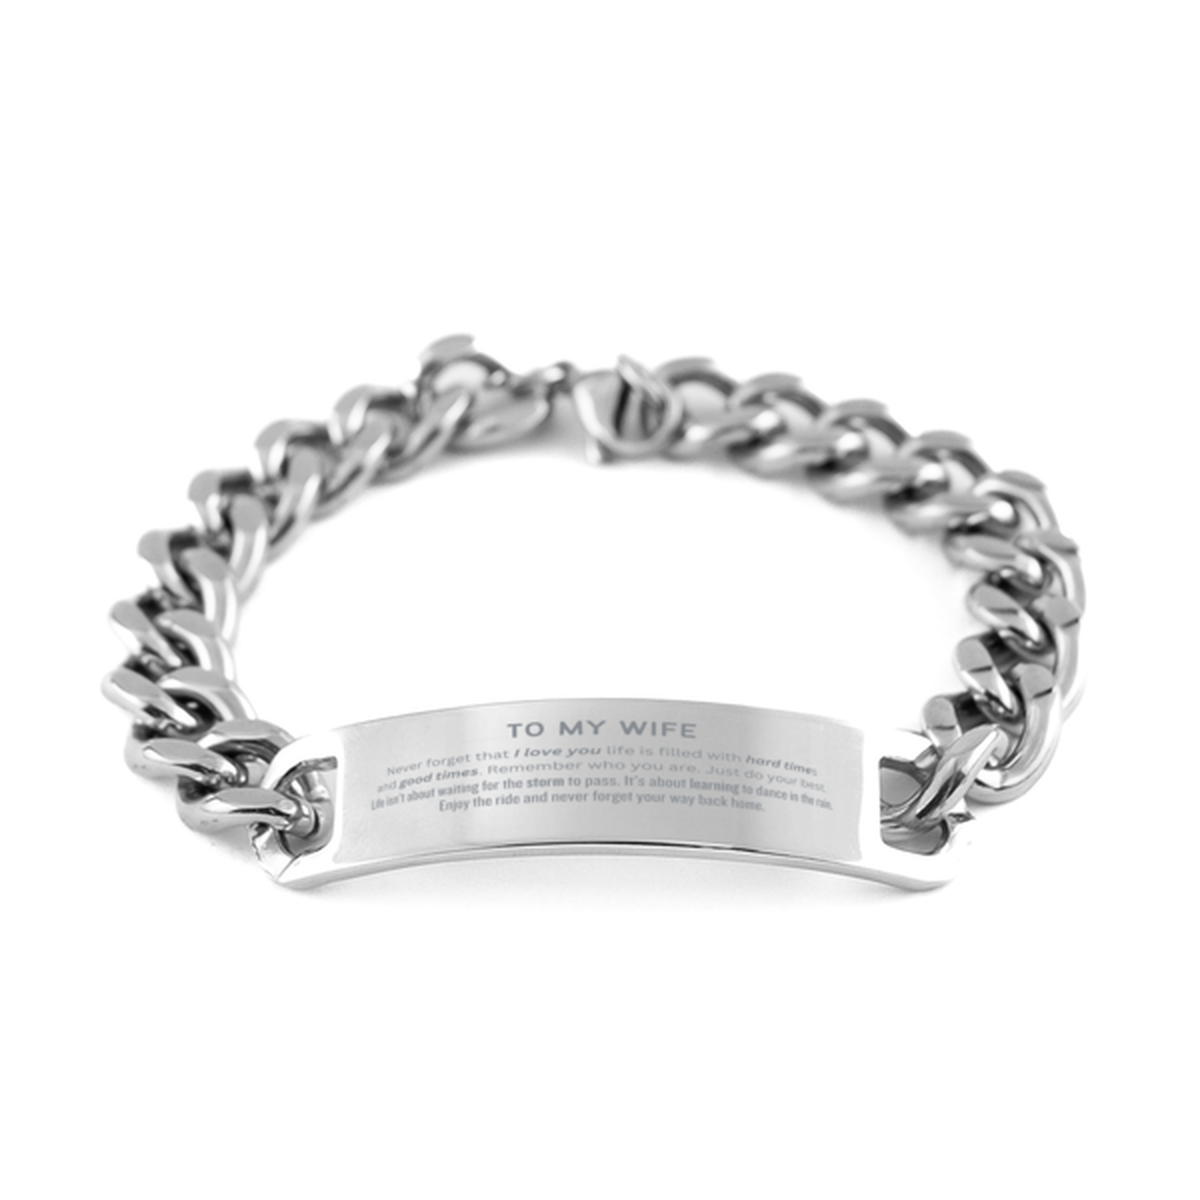 Christmas Wife Cuban Chain Stainless Steel Bracelet Gifts, To My Wife Birthday Thank You Gifts For Wife, Graduation Unique Gifts For Wife To My Wife Never forget that I love you life is filled with hard times and good times. Remember who you are. Just do